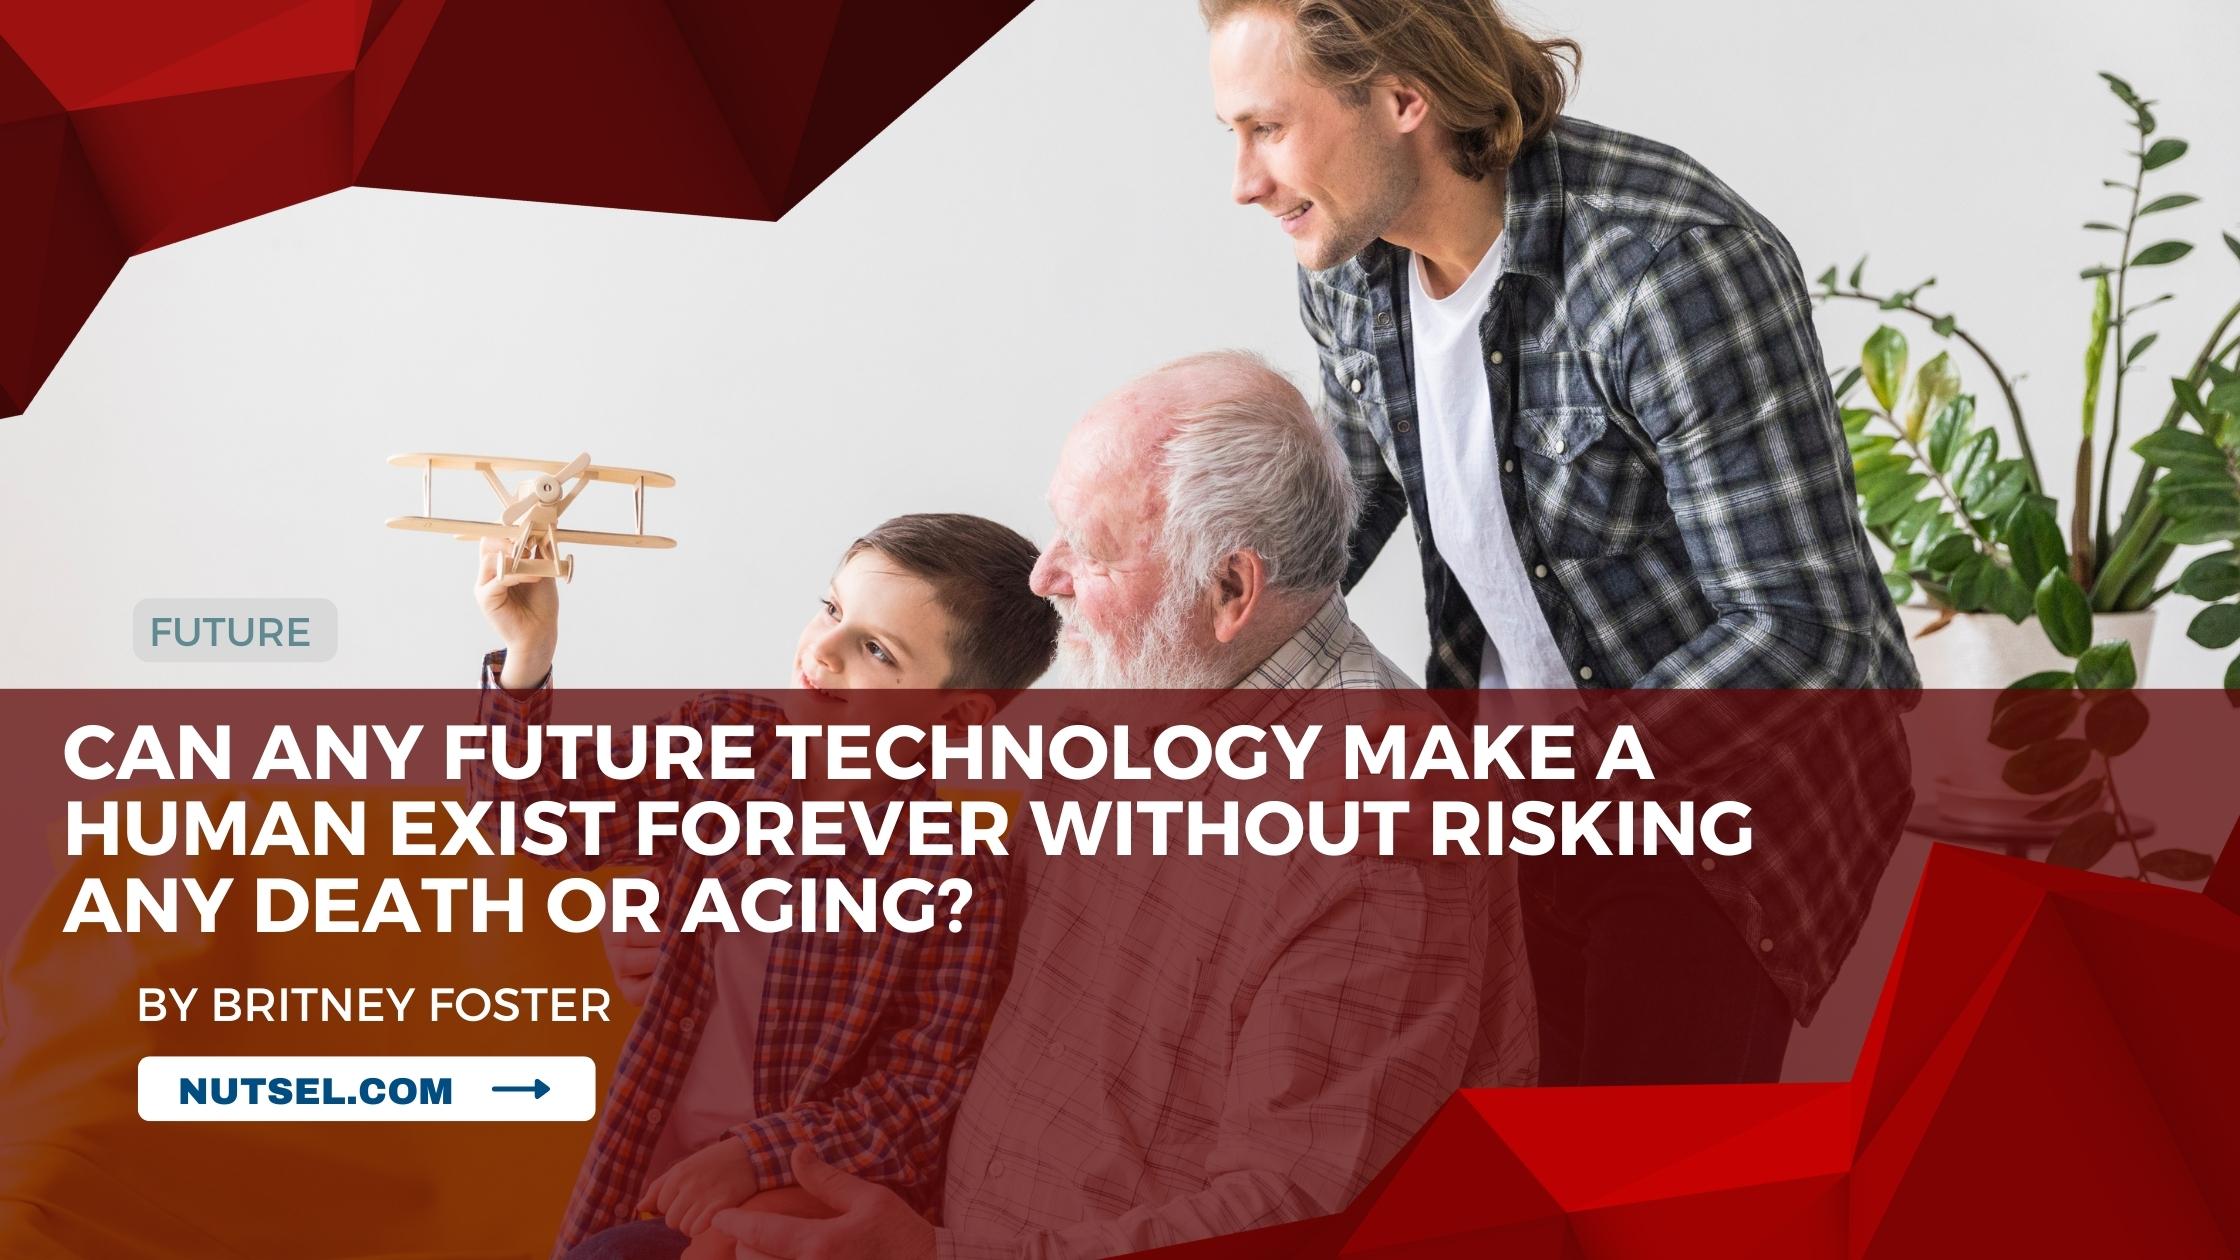 Can any future technology make a human exist forever without risking any death or aging?